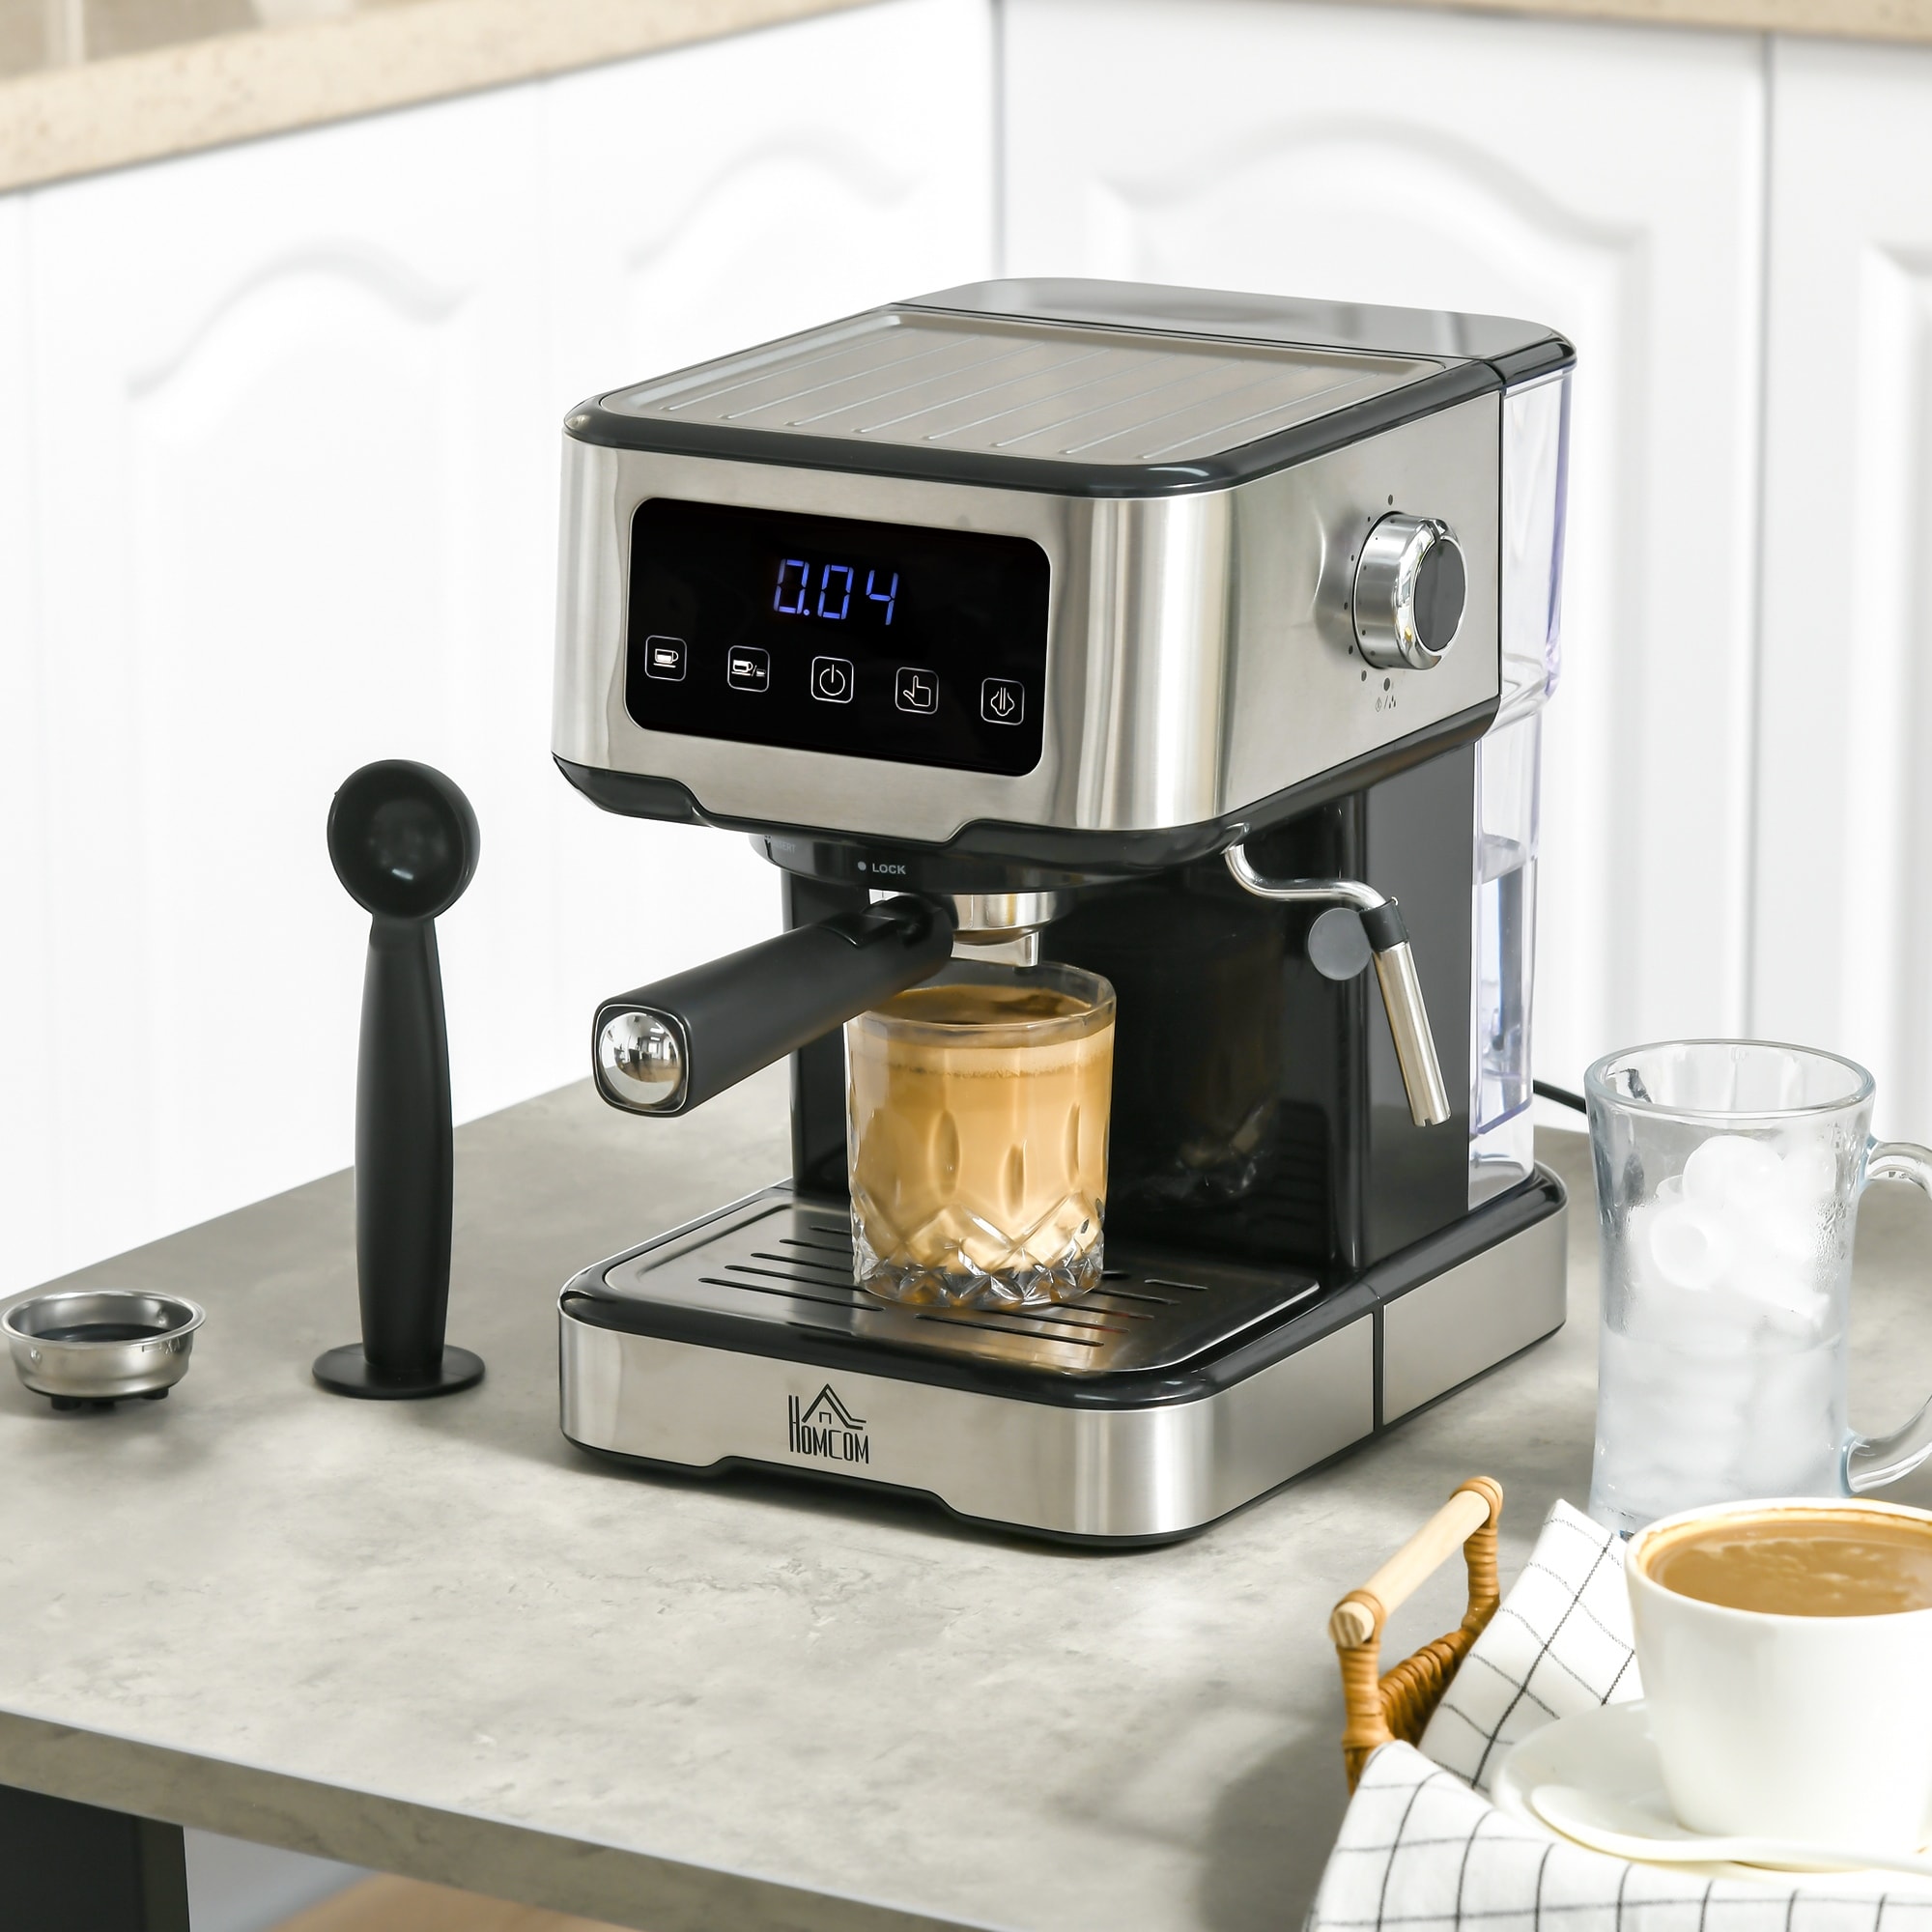 Calphalon Compact Espresso Machine, Home Espresso Machine with Milk Frother, Stainless Steel